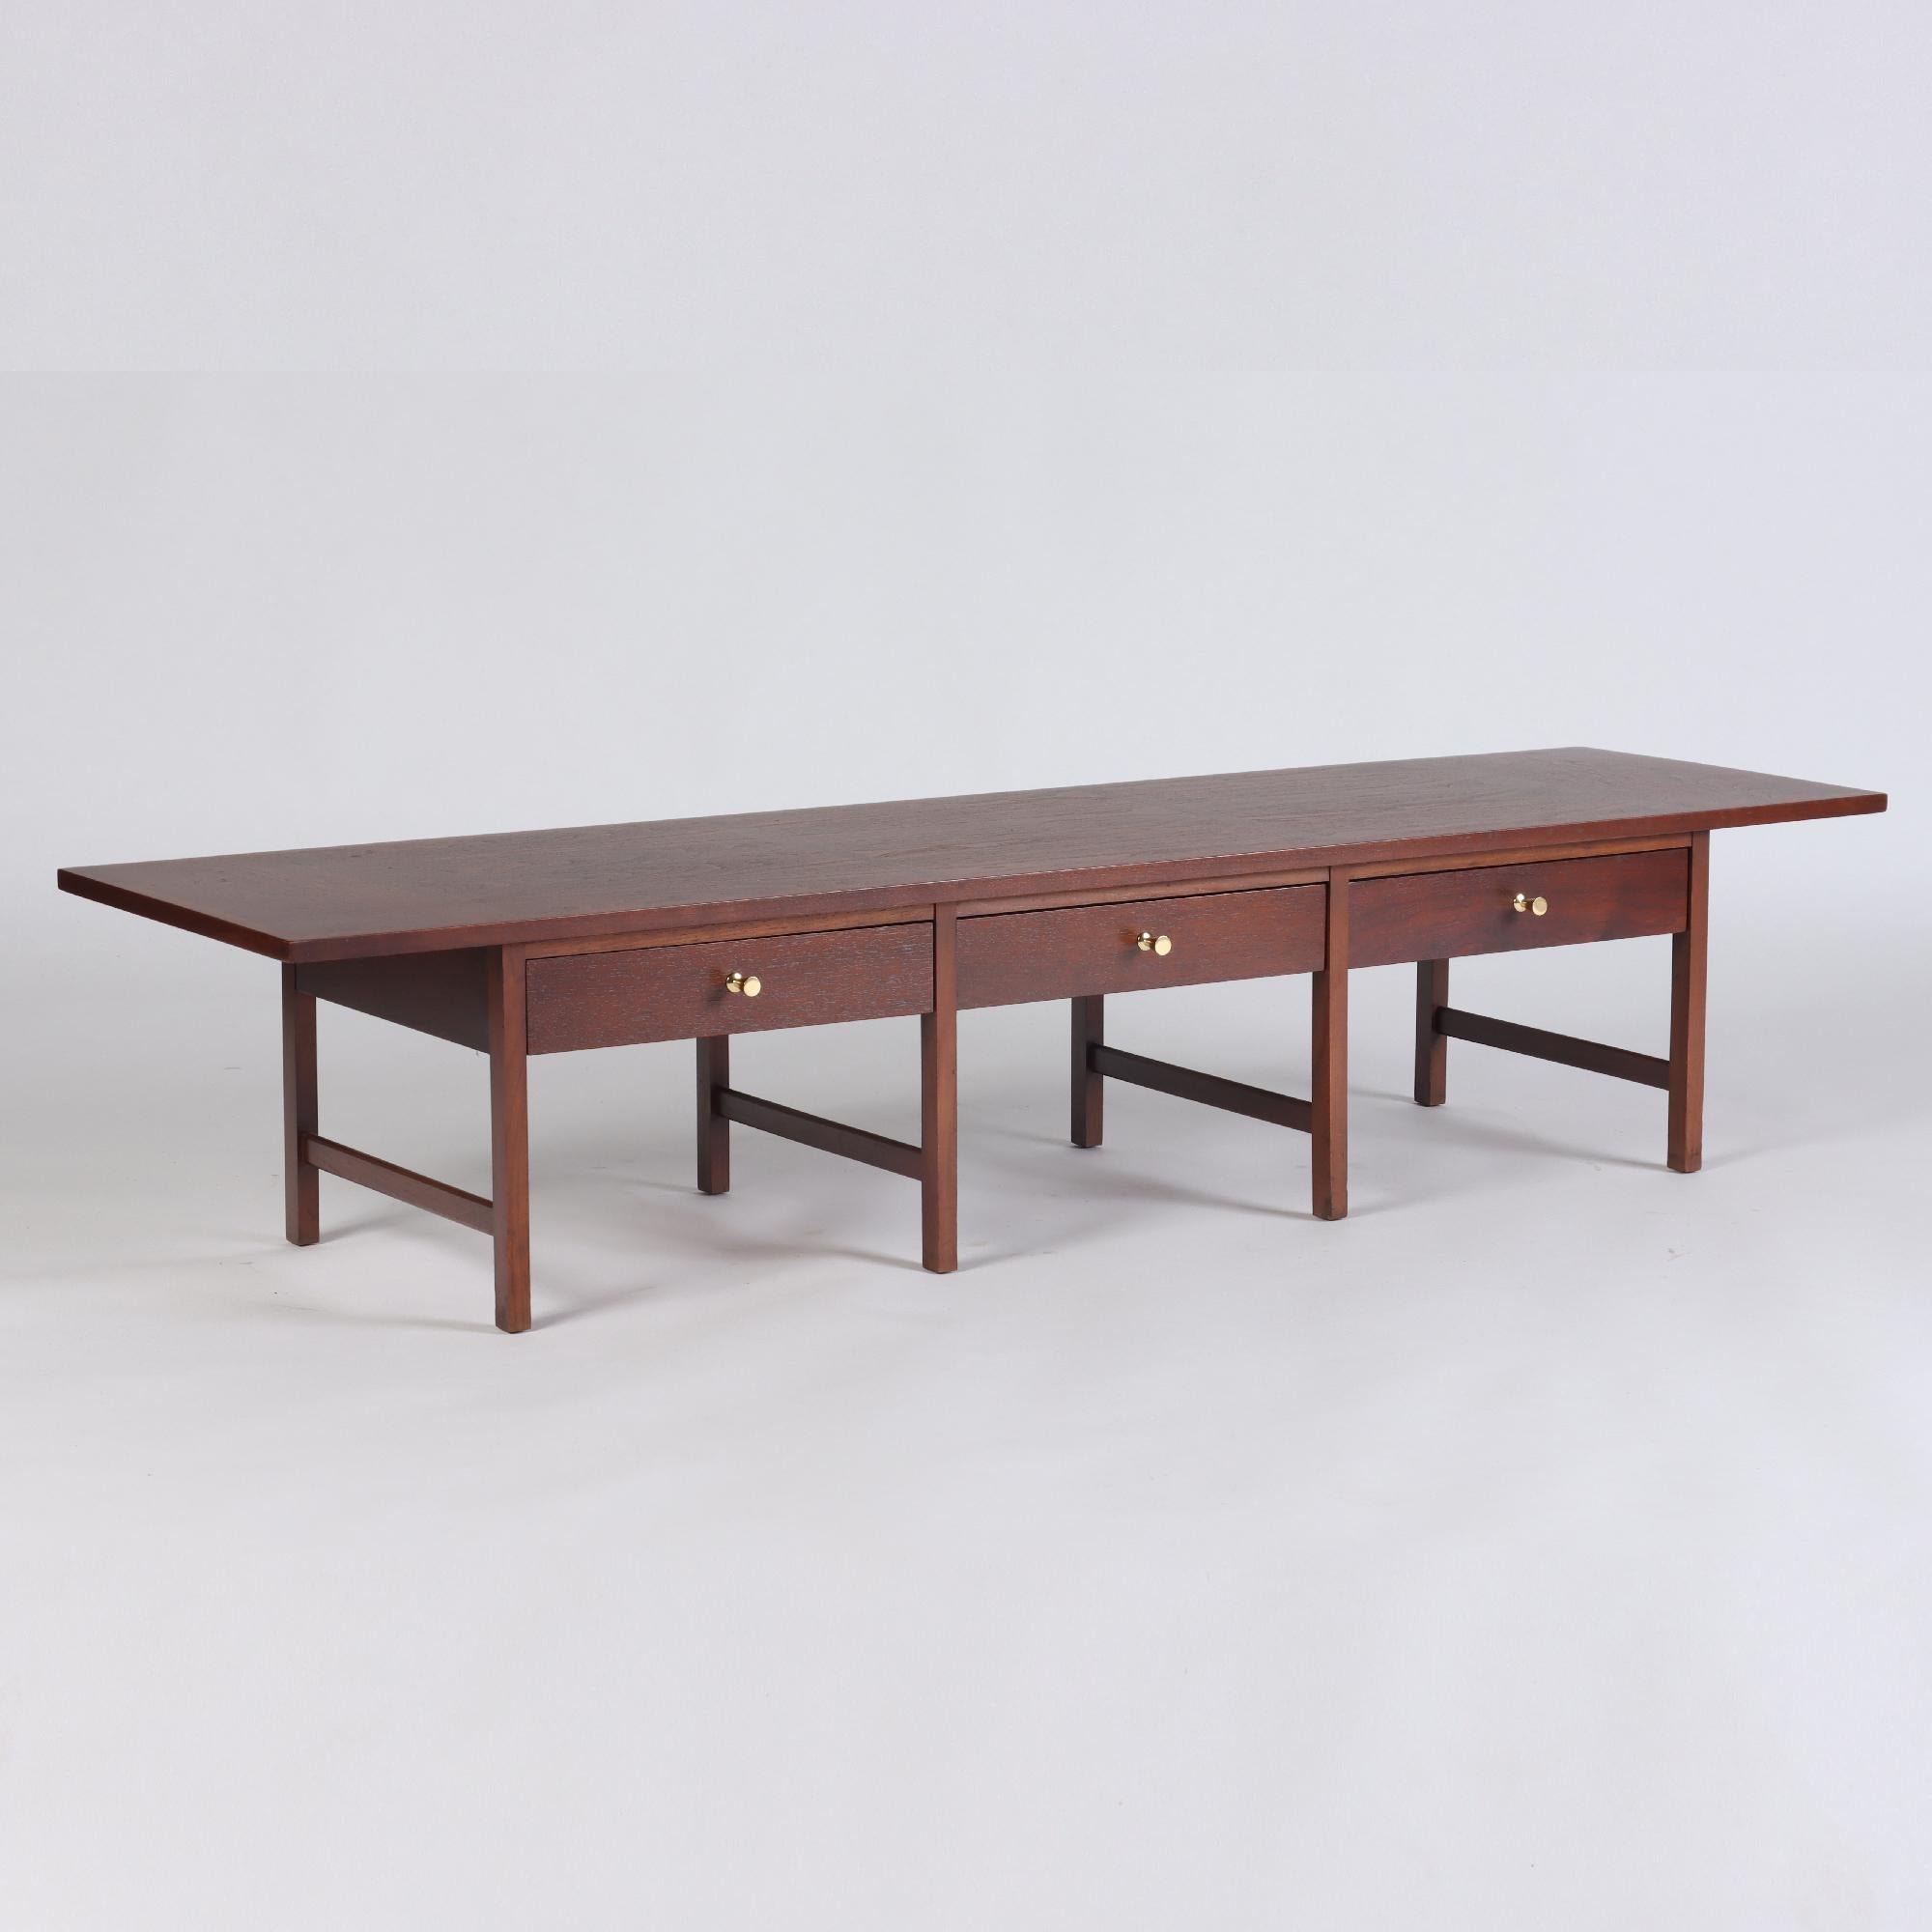 A Mid Century Modern coffee table by Paul McCobb for Calvin Furniture. (1960s).